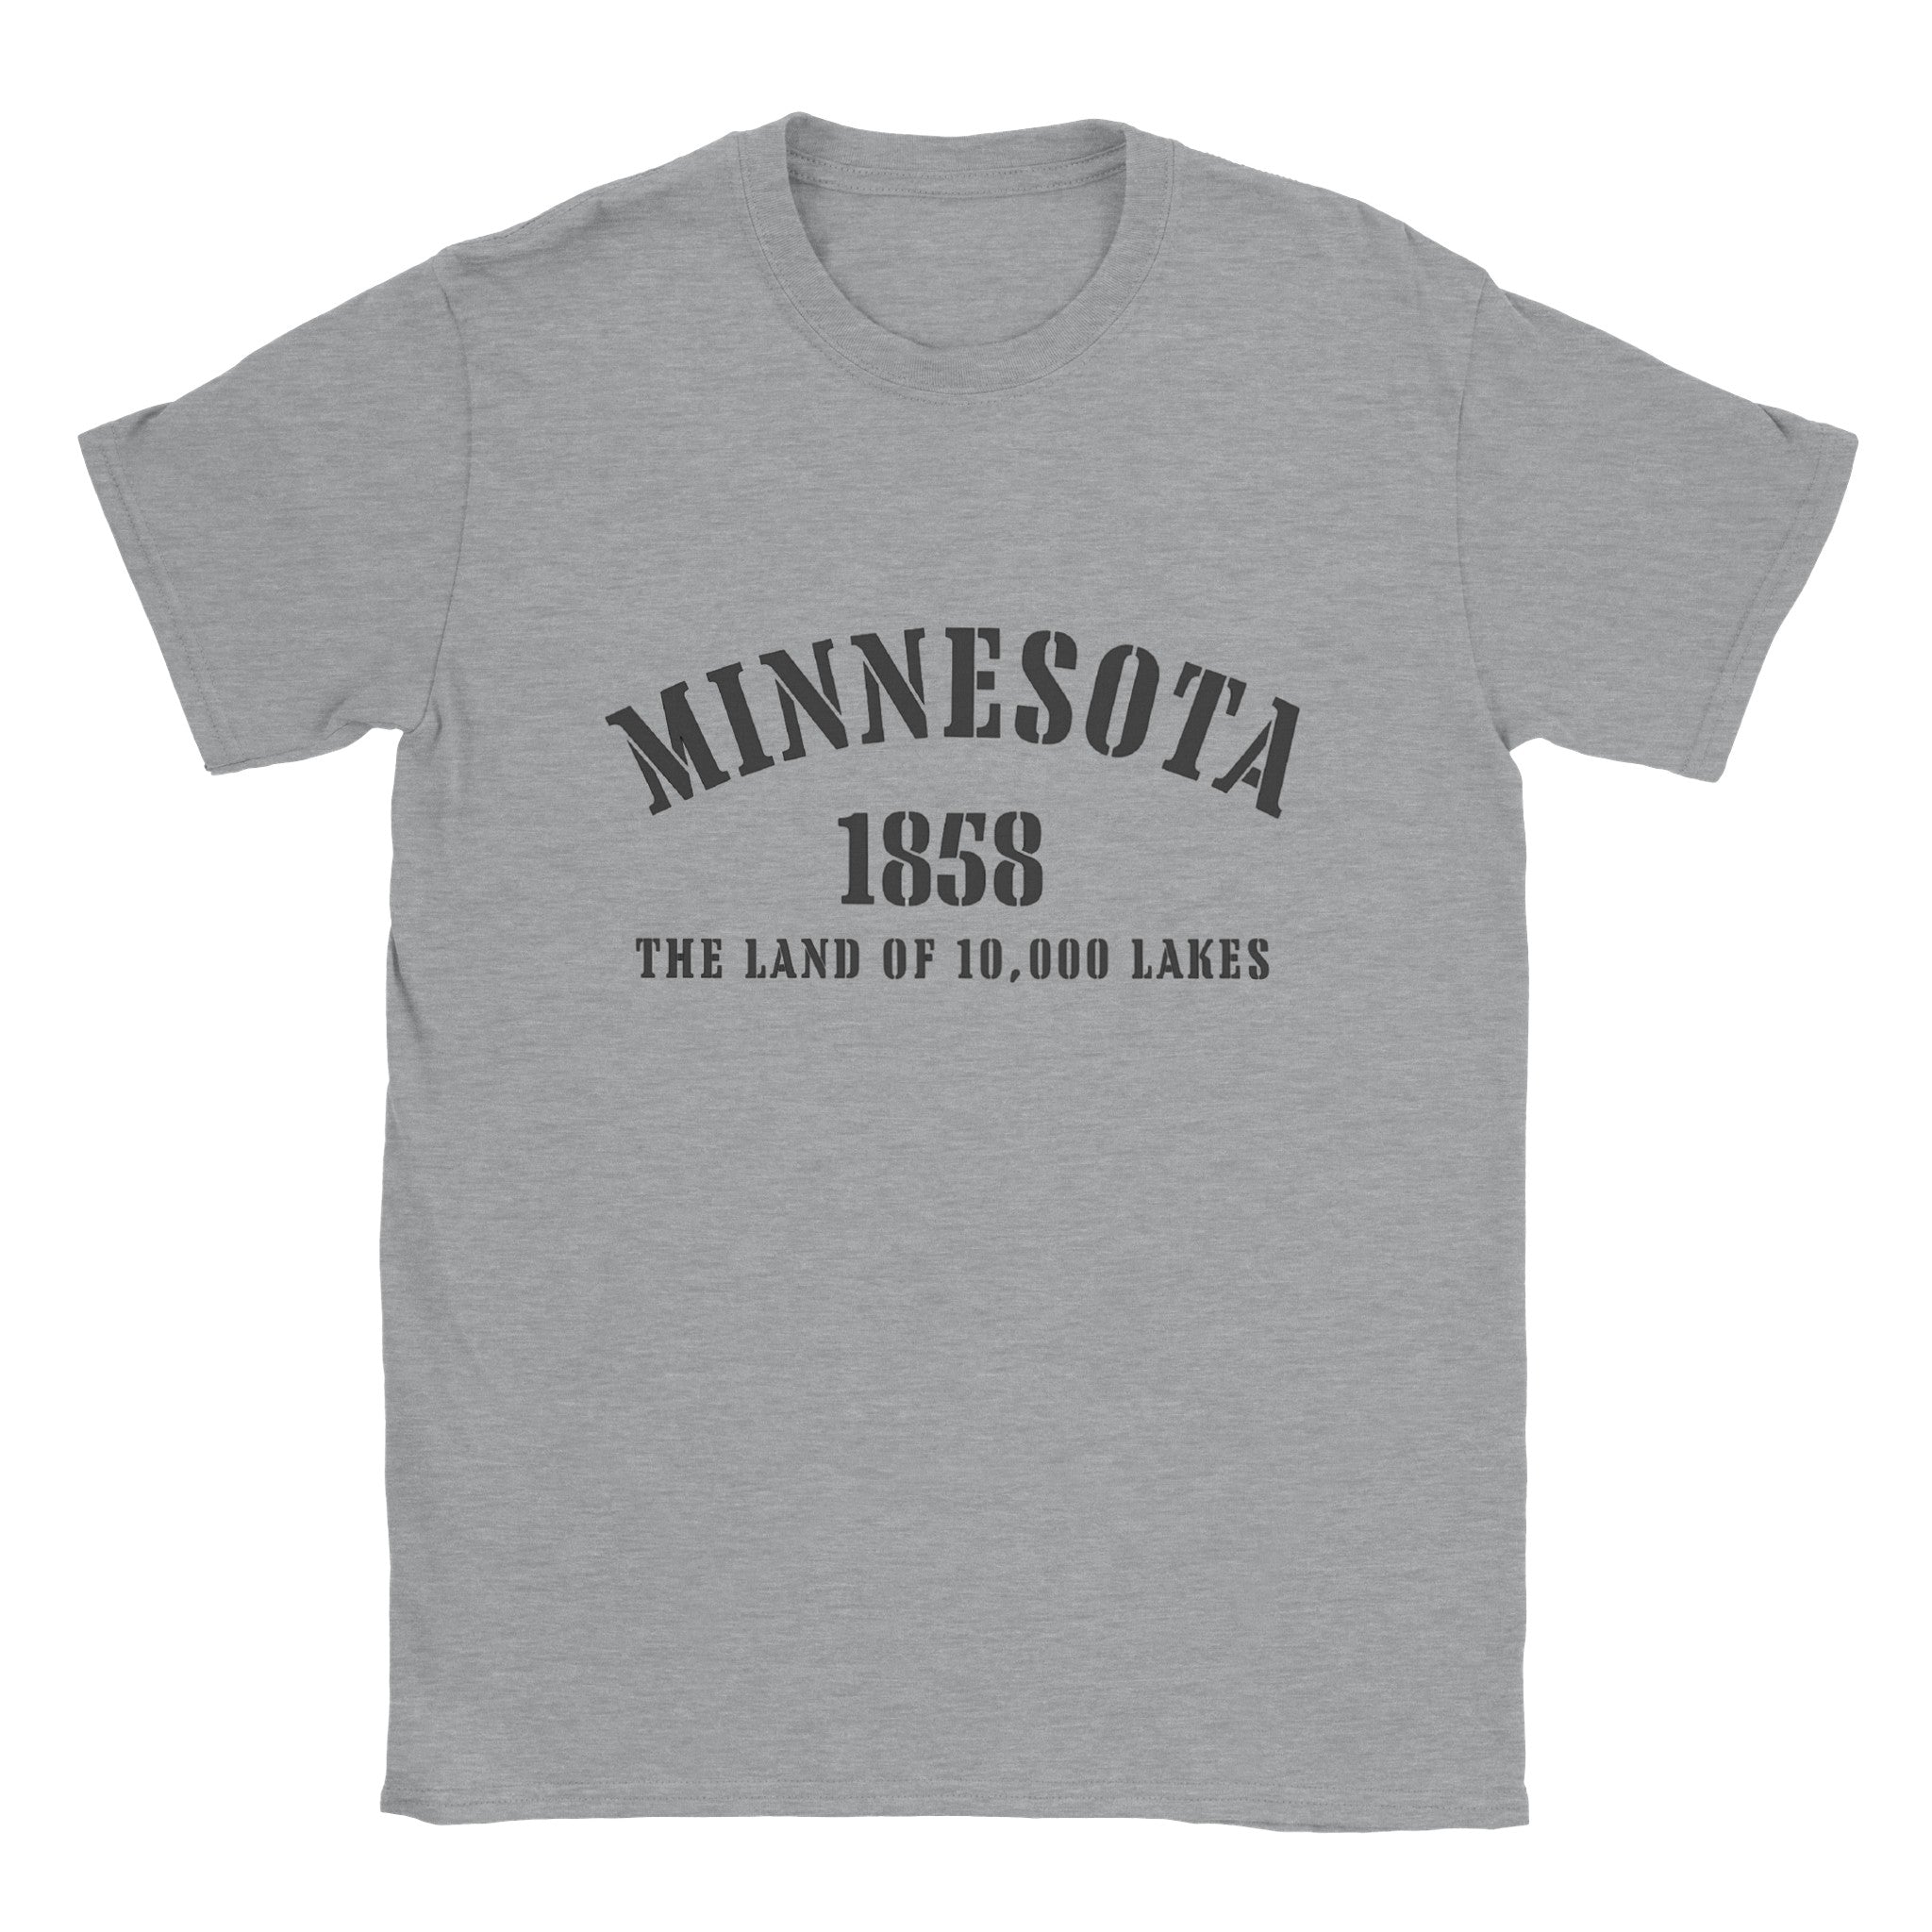 Minnesota- Classic Unisex Crewneck States T-shirt - Creations by Chris and Carlos